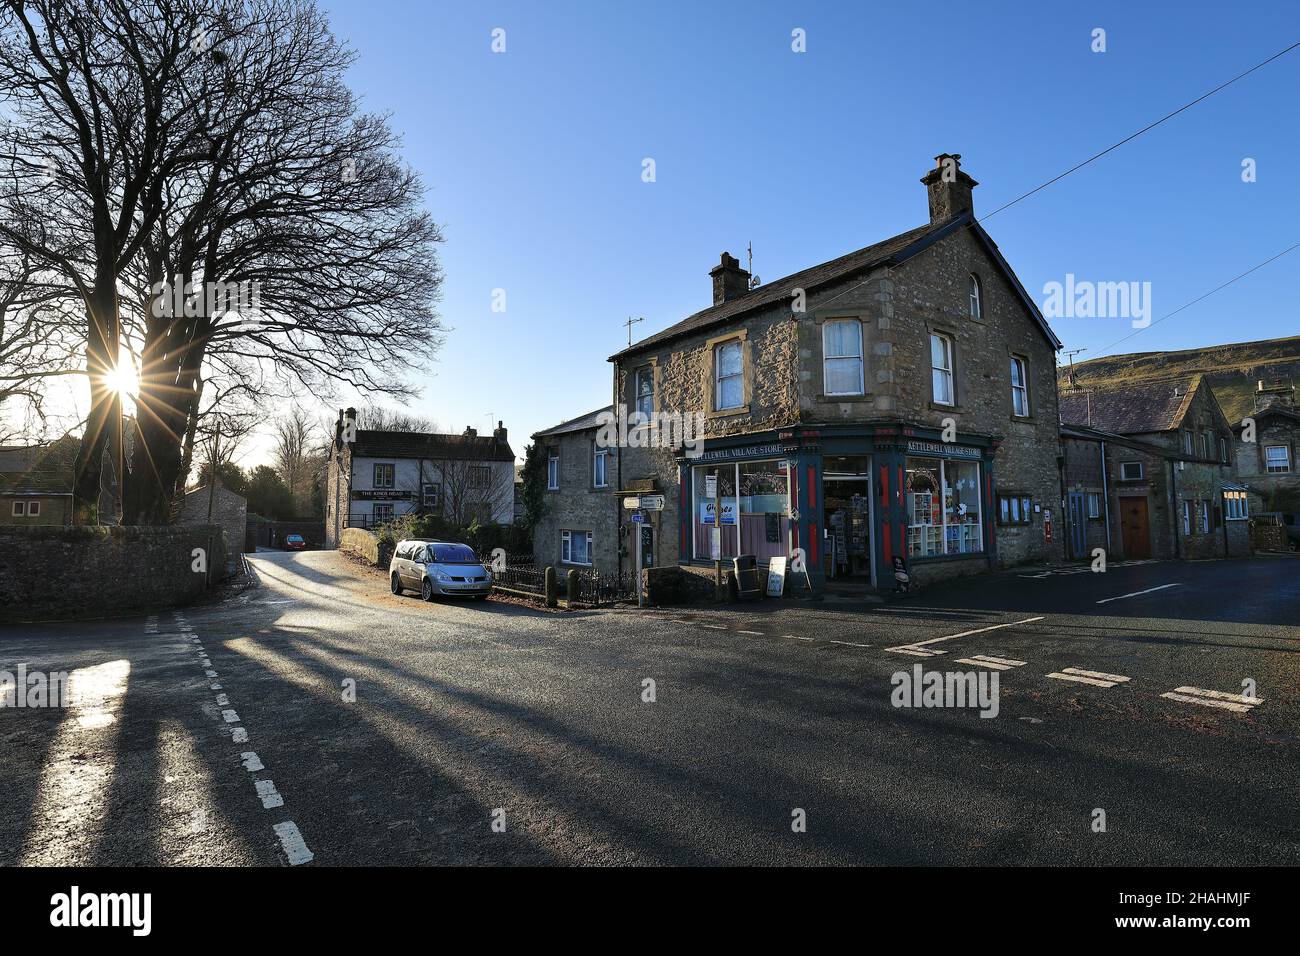 Homes and buildings in the village of Kettlewell, Upper-Warfedale, Yorkshire Dales, including Kettlewell Village Store Stock Photo